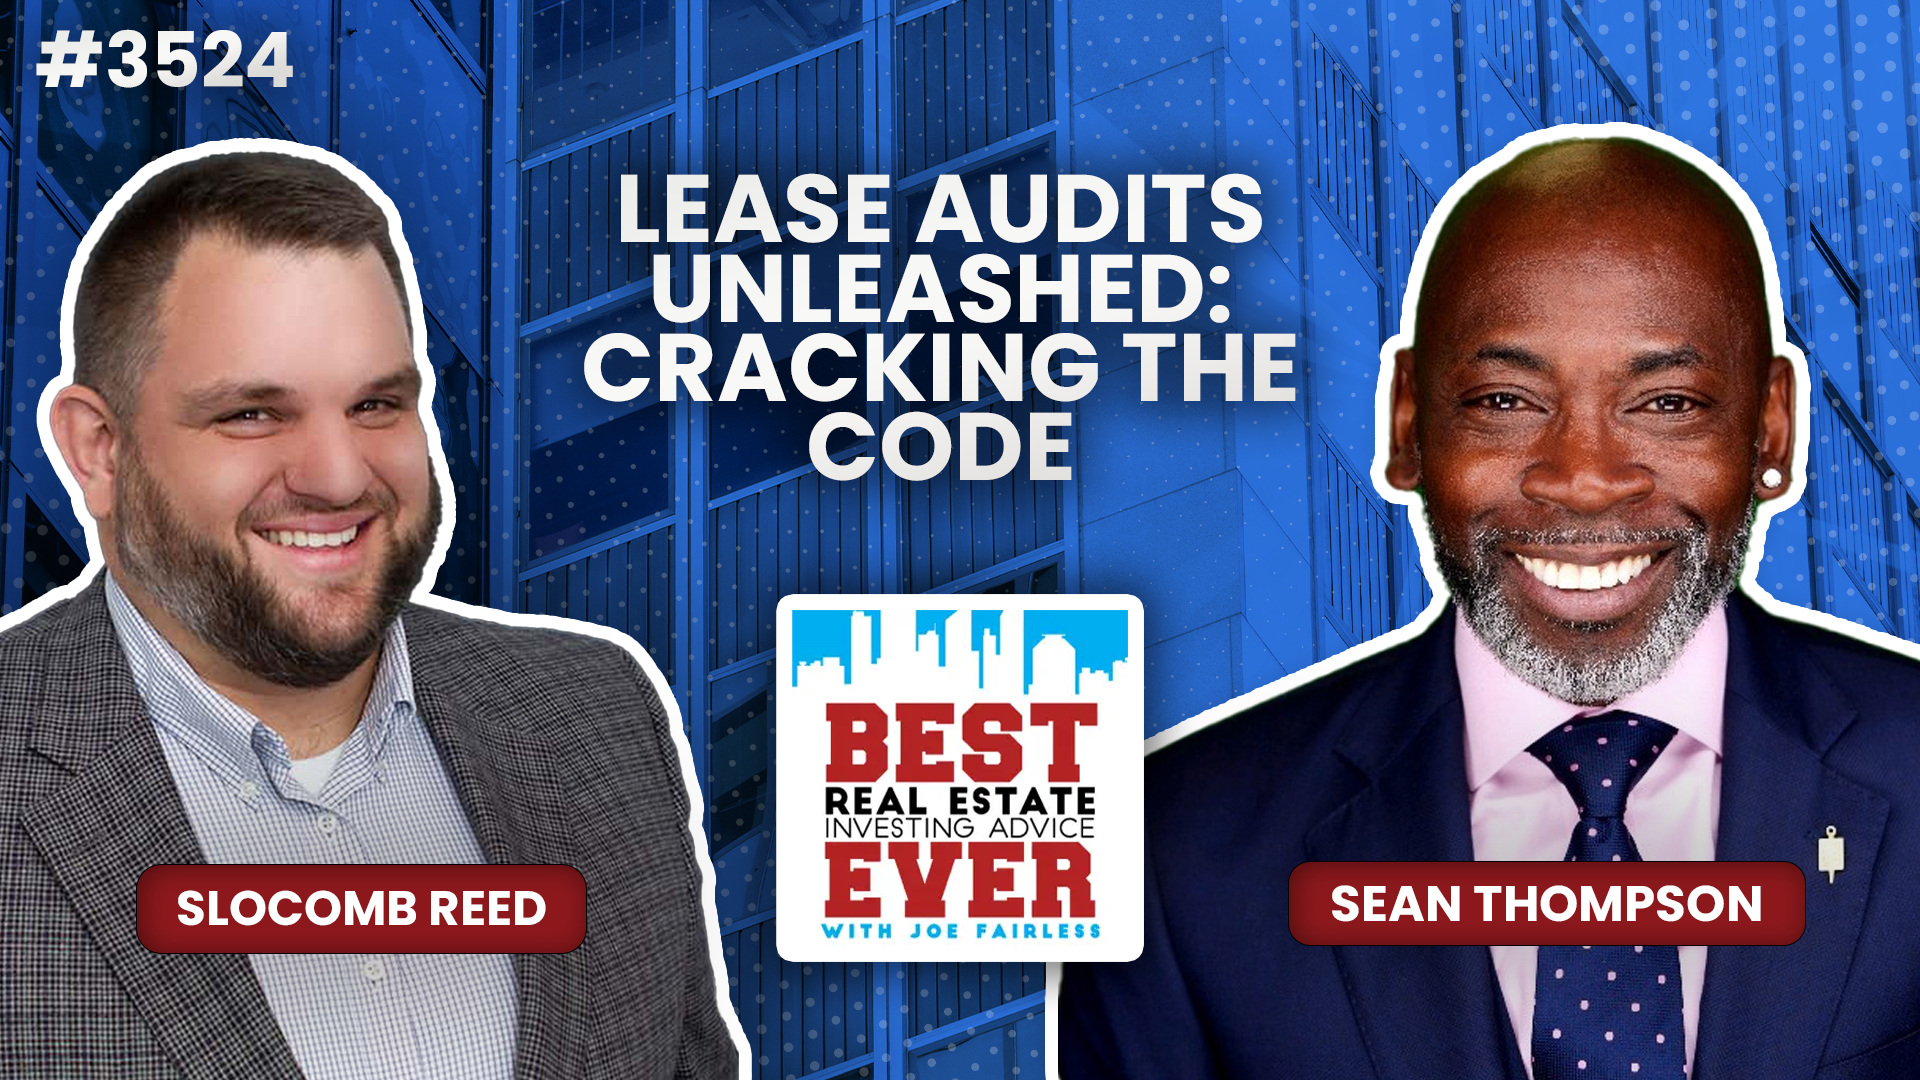 JF3524: Lease Audits Unleashed: Cracking the Code — The Due Diligence Show ft. Sean Thompson